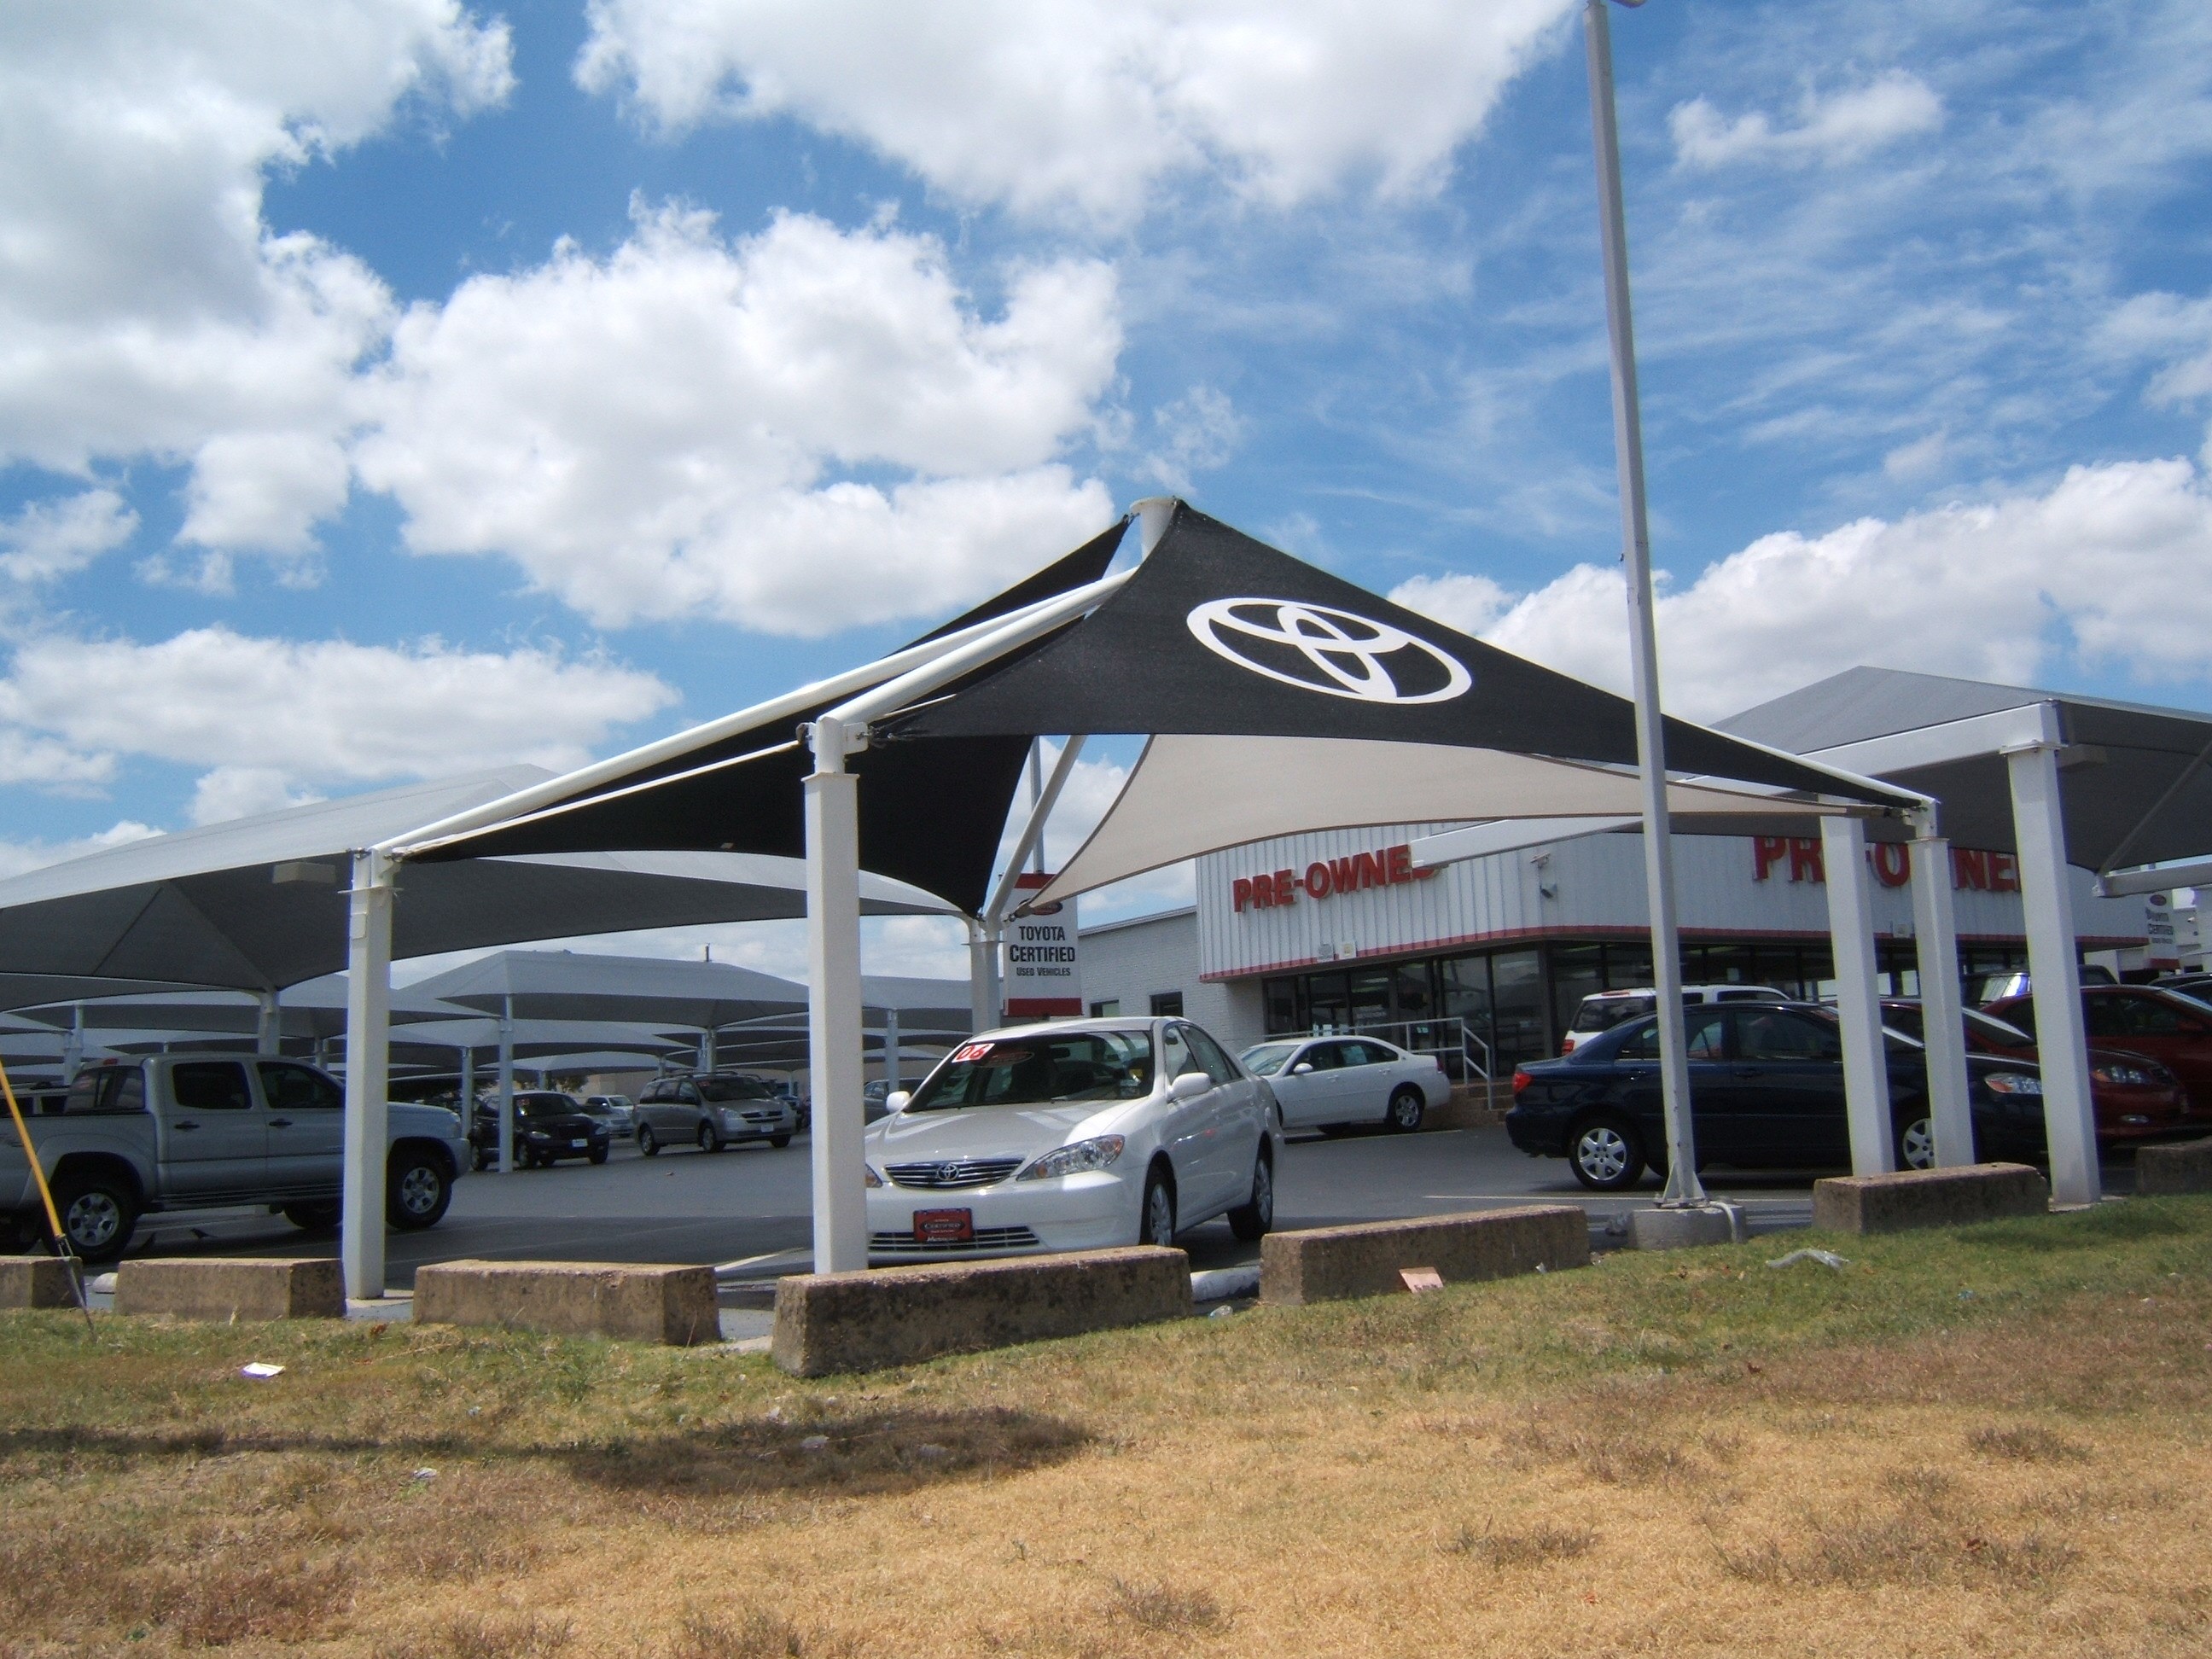 Shade structure at car dealership with Toyota logo